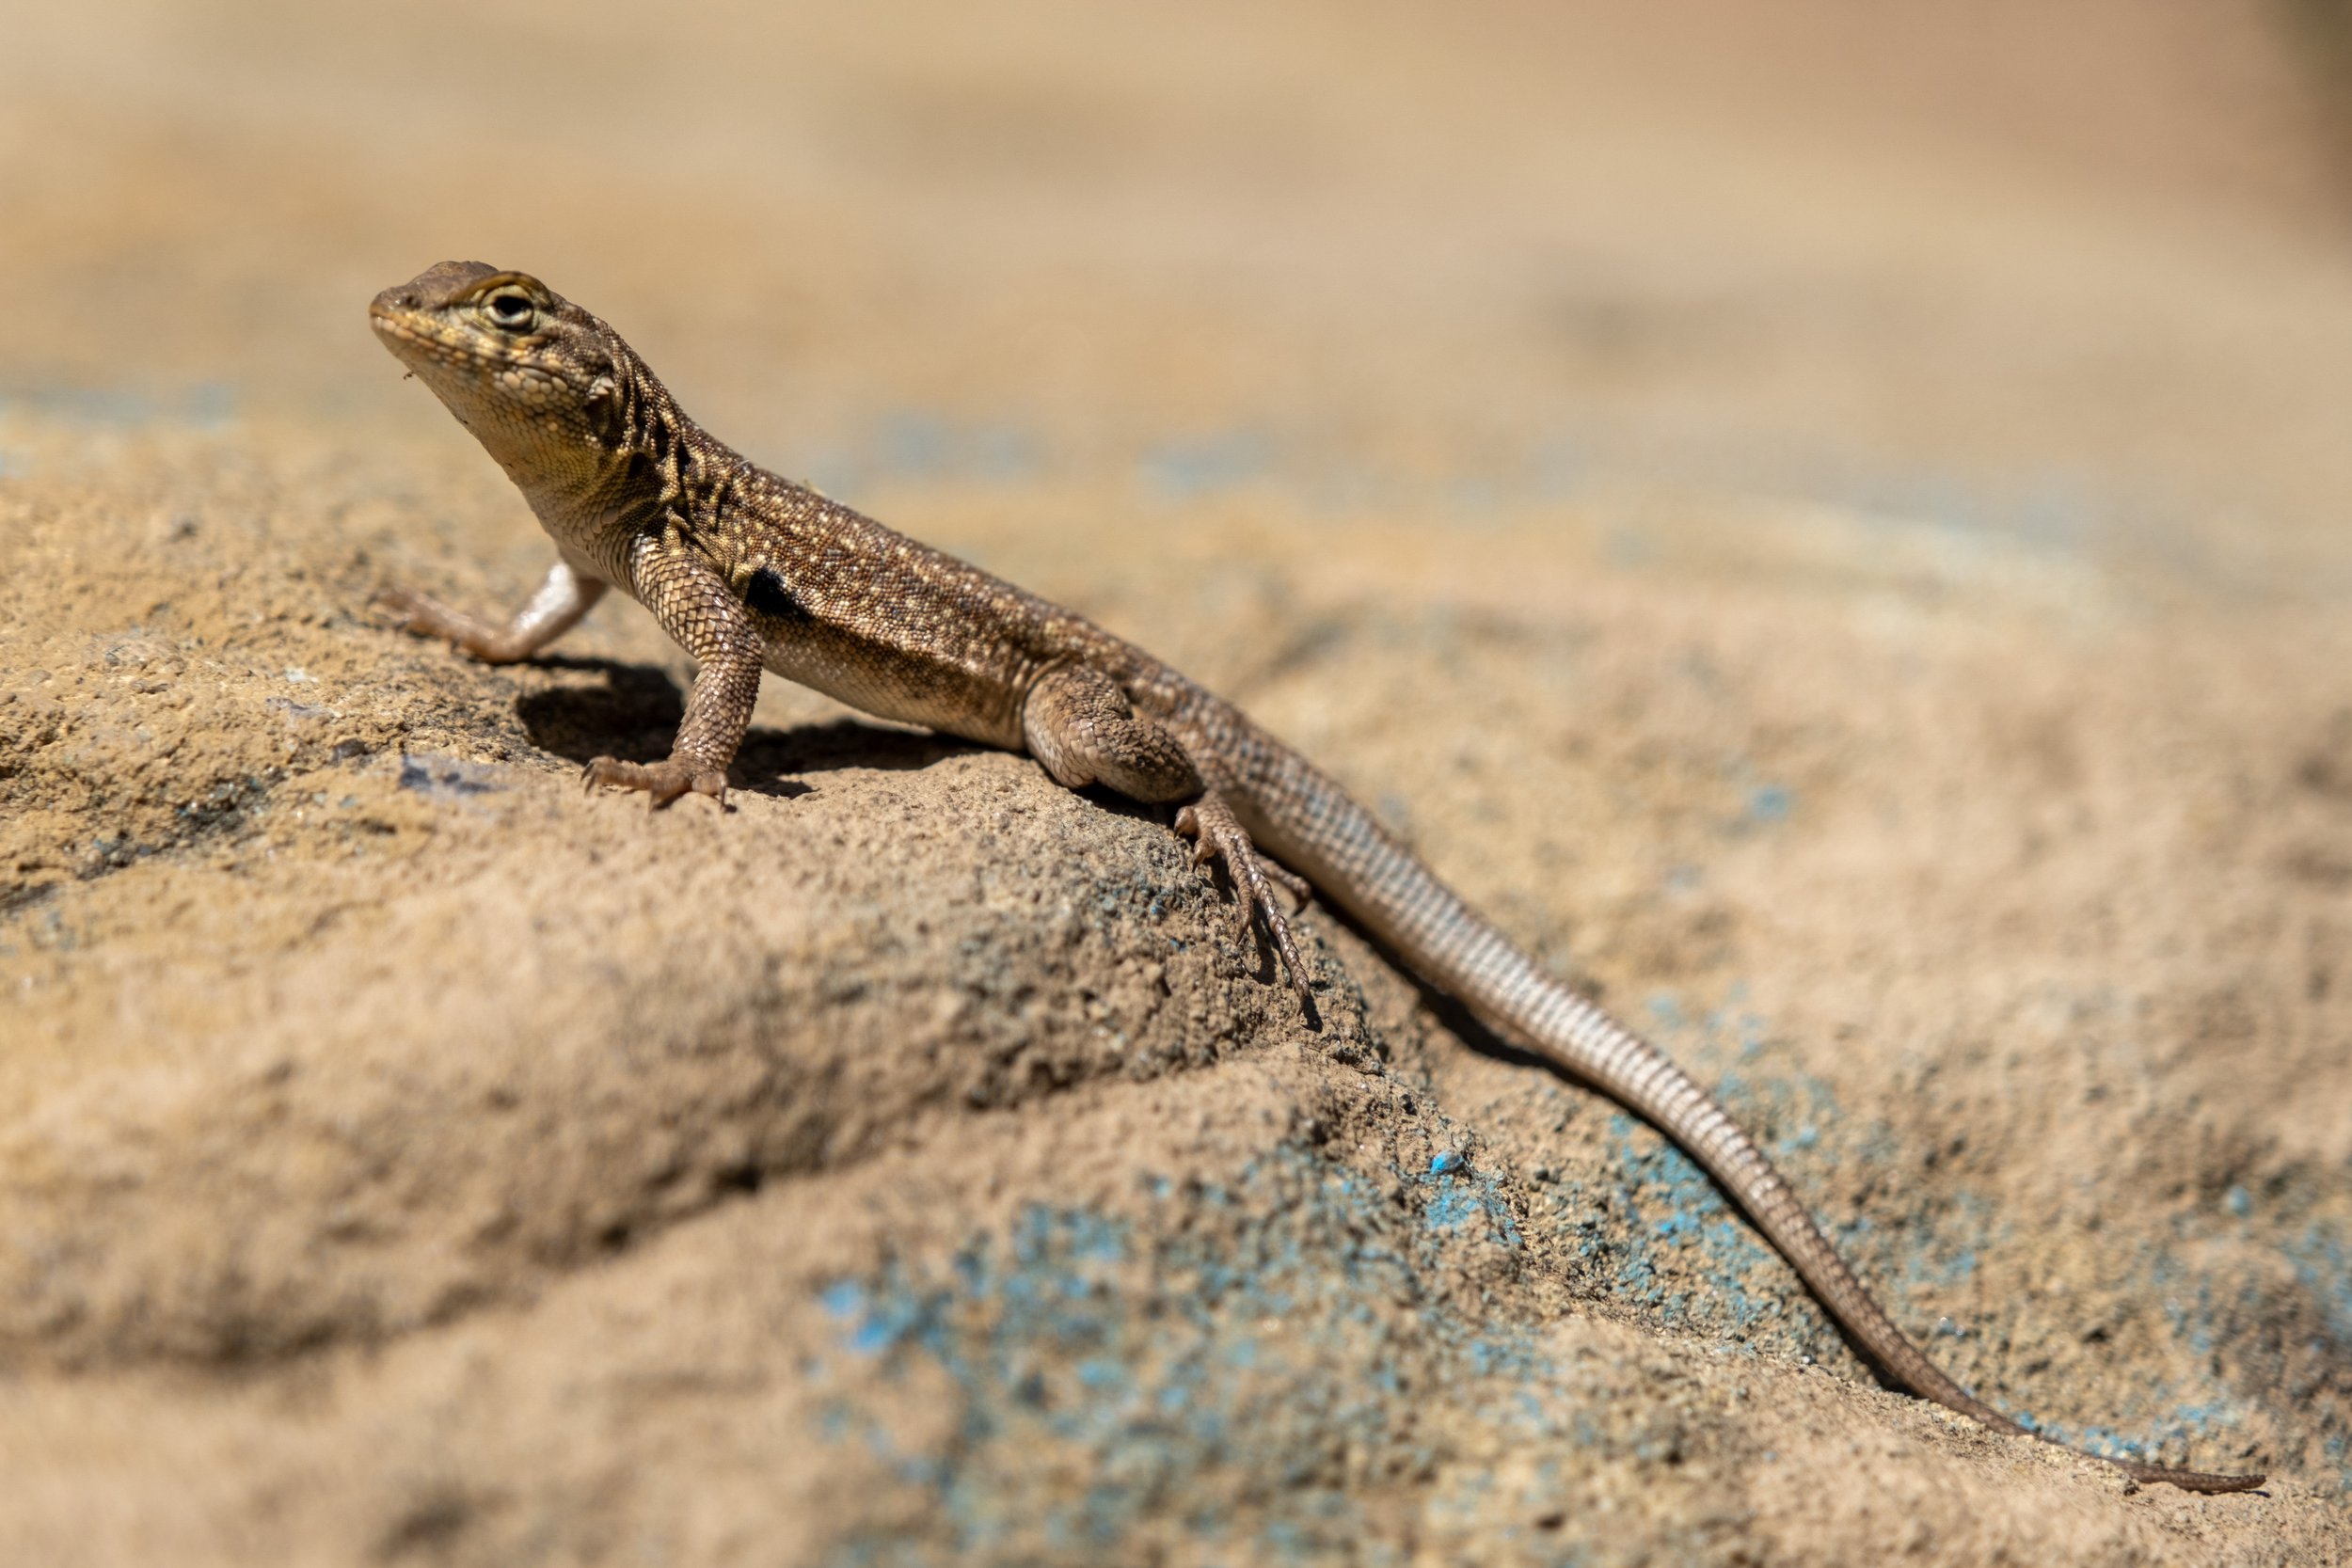  Lizard basking on a rock in the sun at Stoney Point Park in Chatsworth, Los Angeles, California on Saturday, April 9, 2022. (Anna Sophia Moltke | The Corsair) 